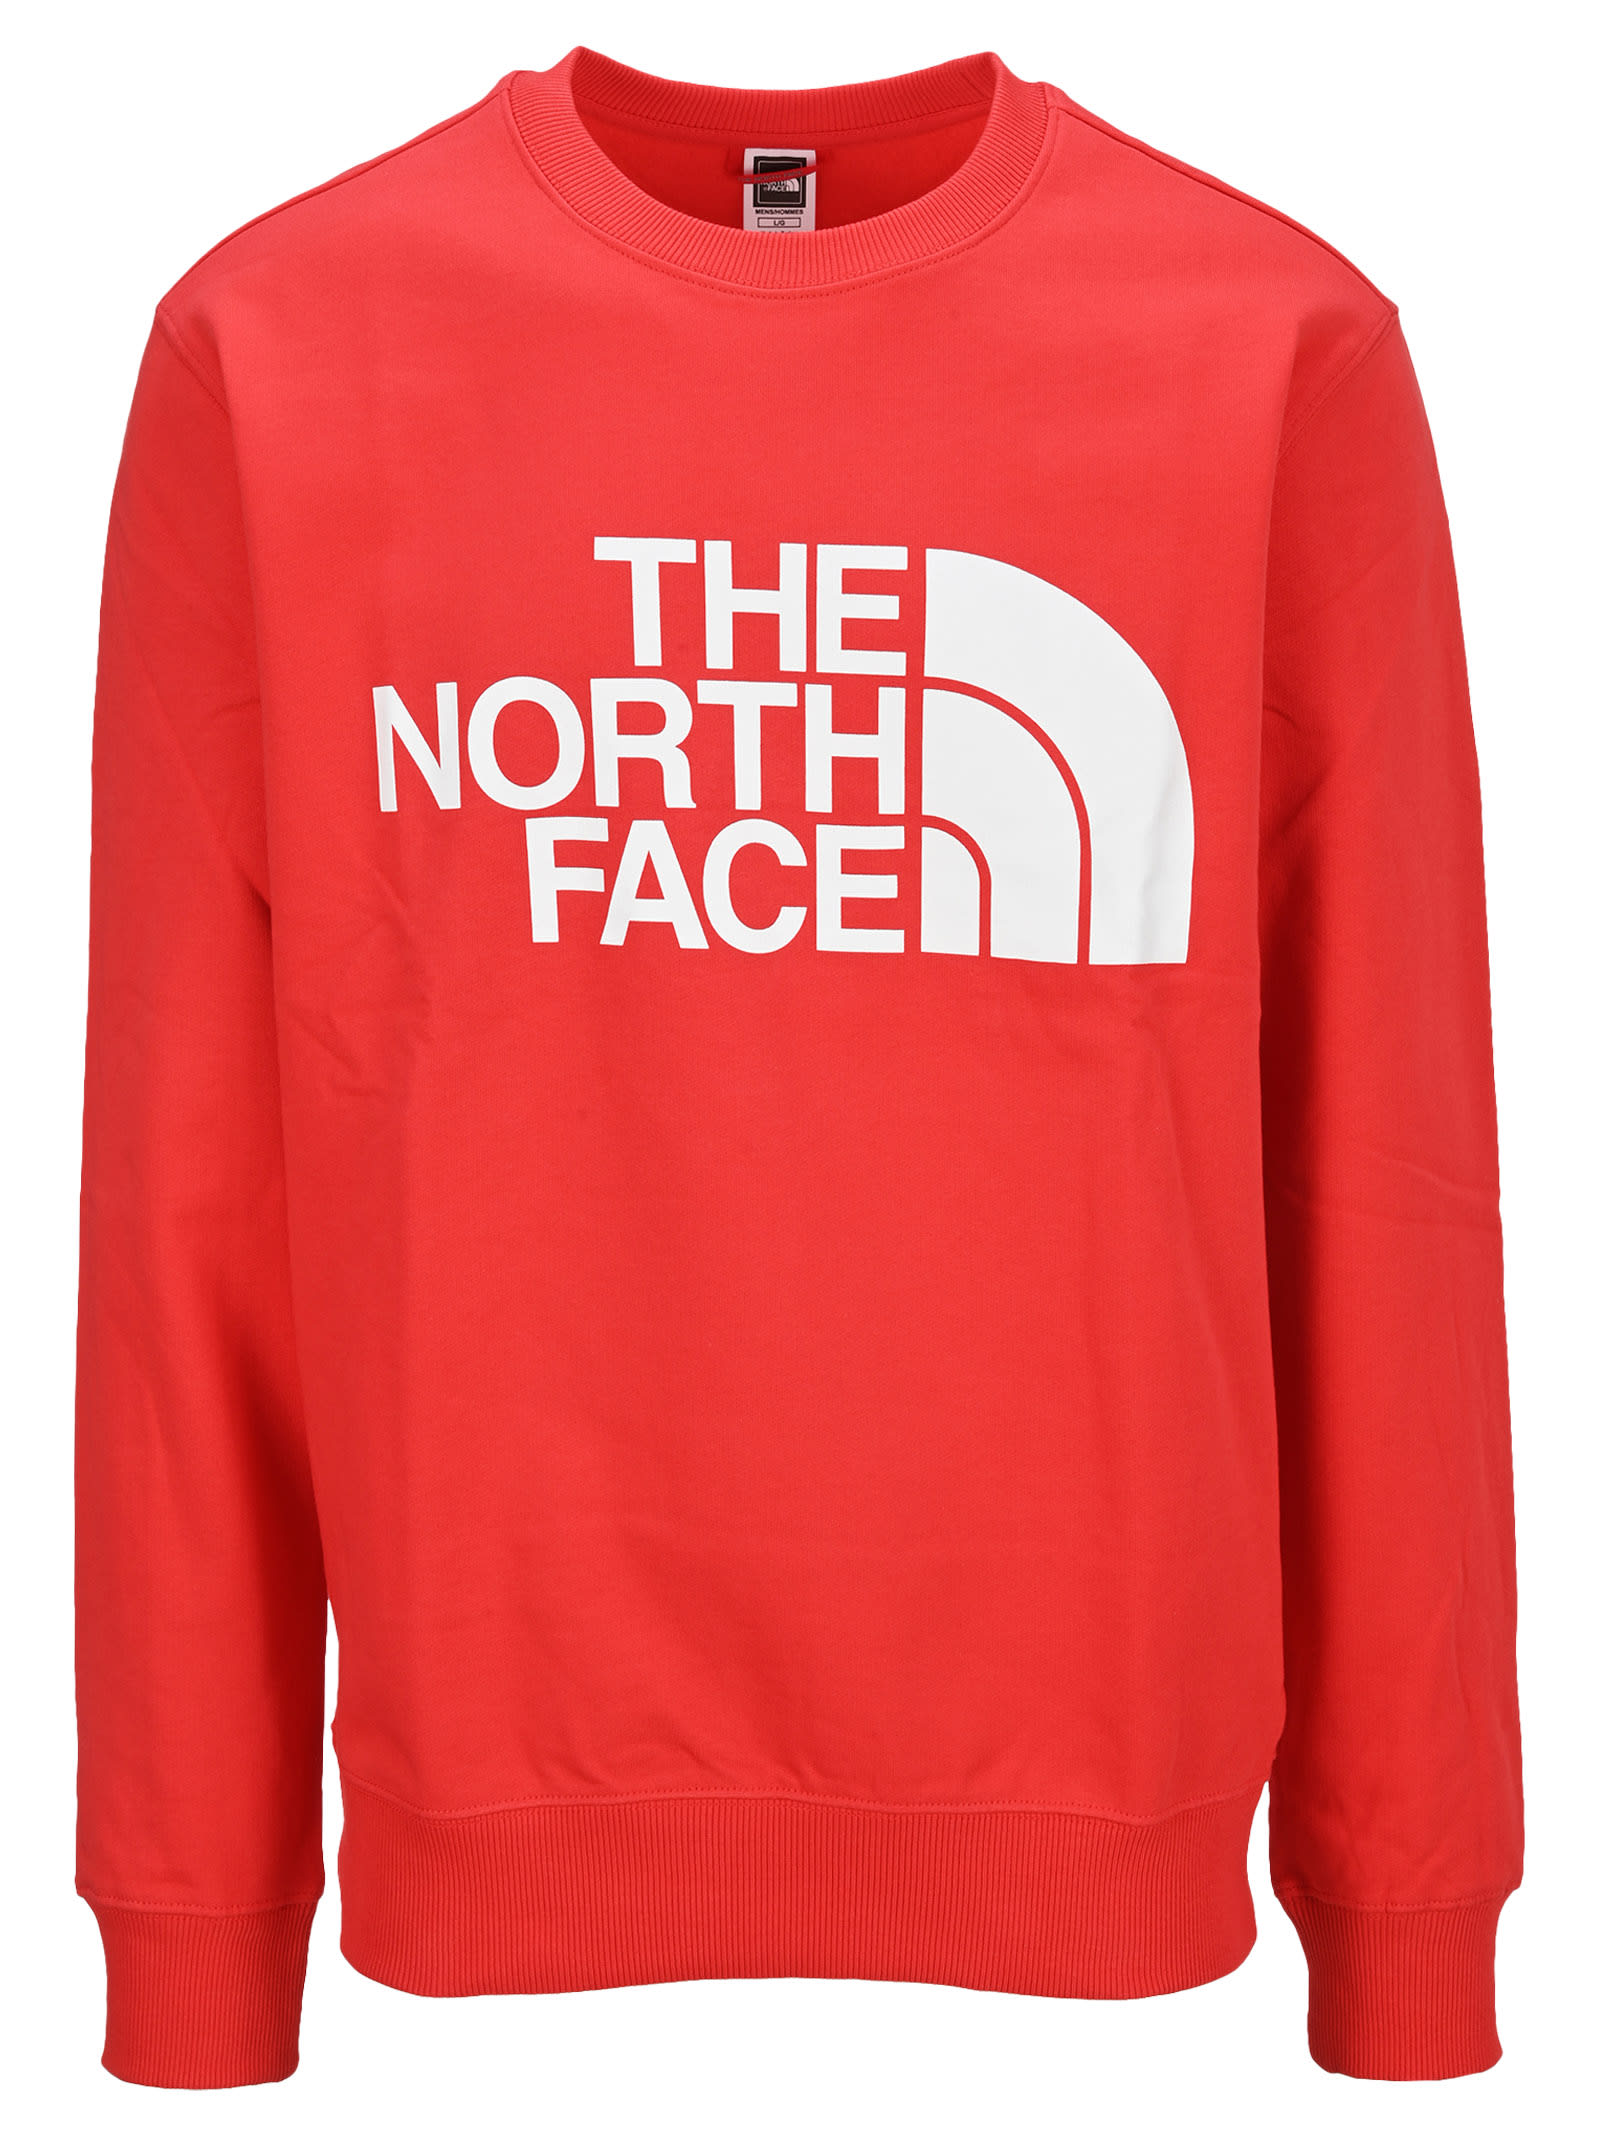 The North Face North Face Classic Crewneck